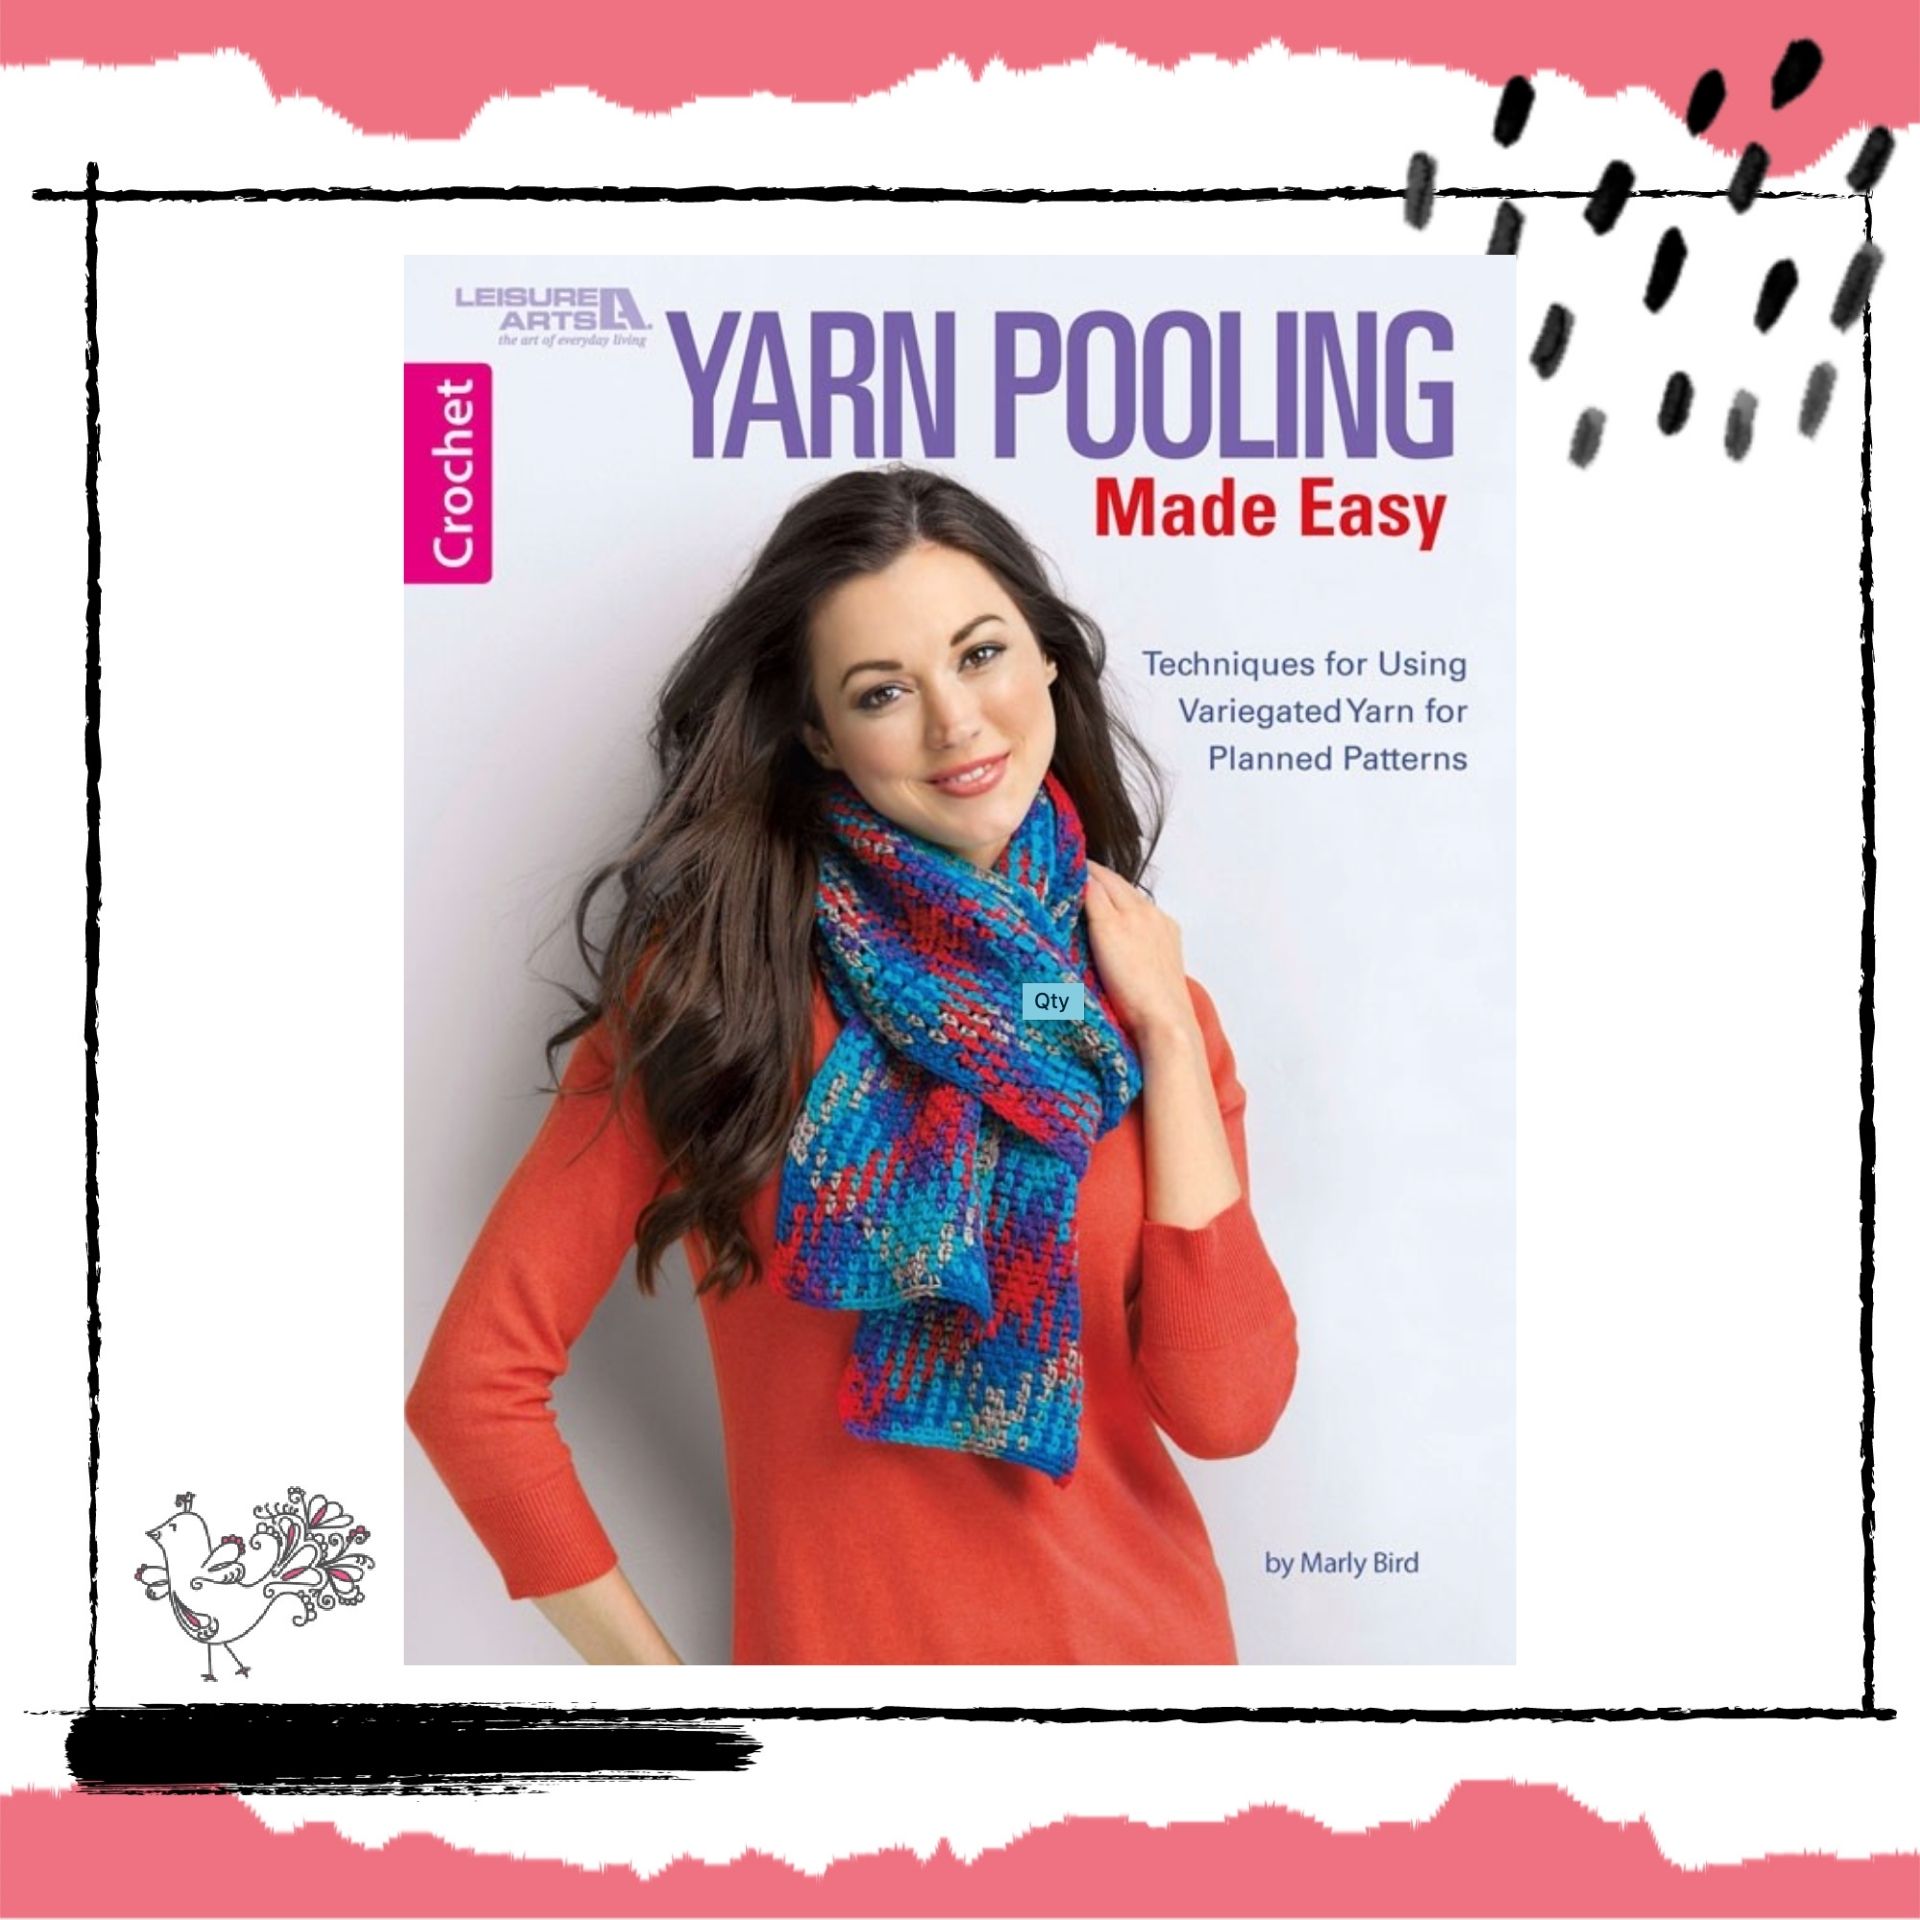 Book Review: Yarn Pooling Made Easy by Marly Bird - Underground